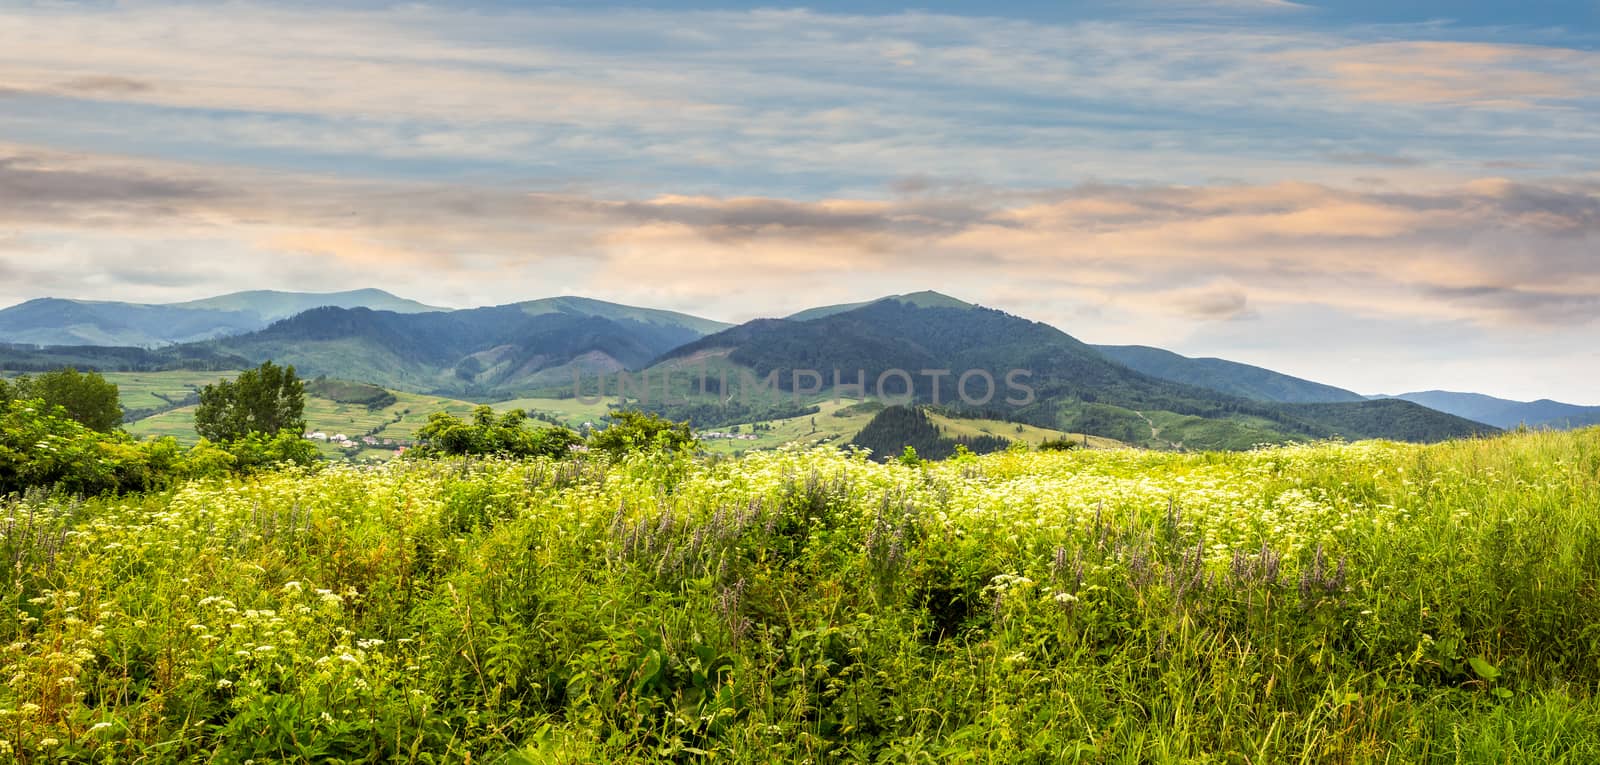 composite mountain landscape. wild flowers on meadow in mountains